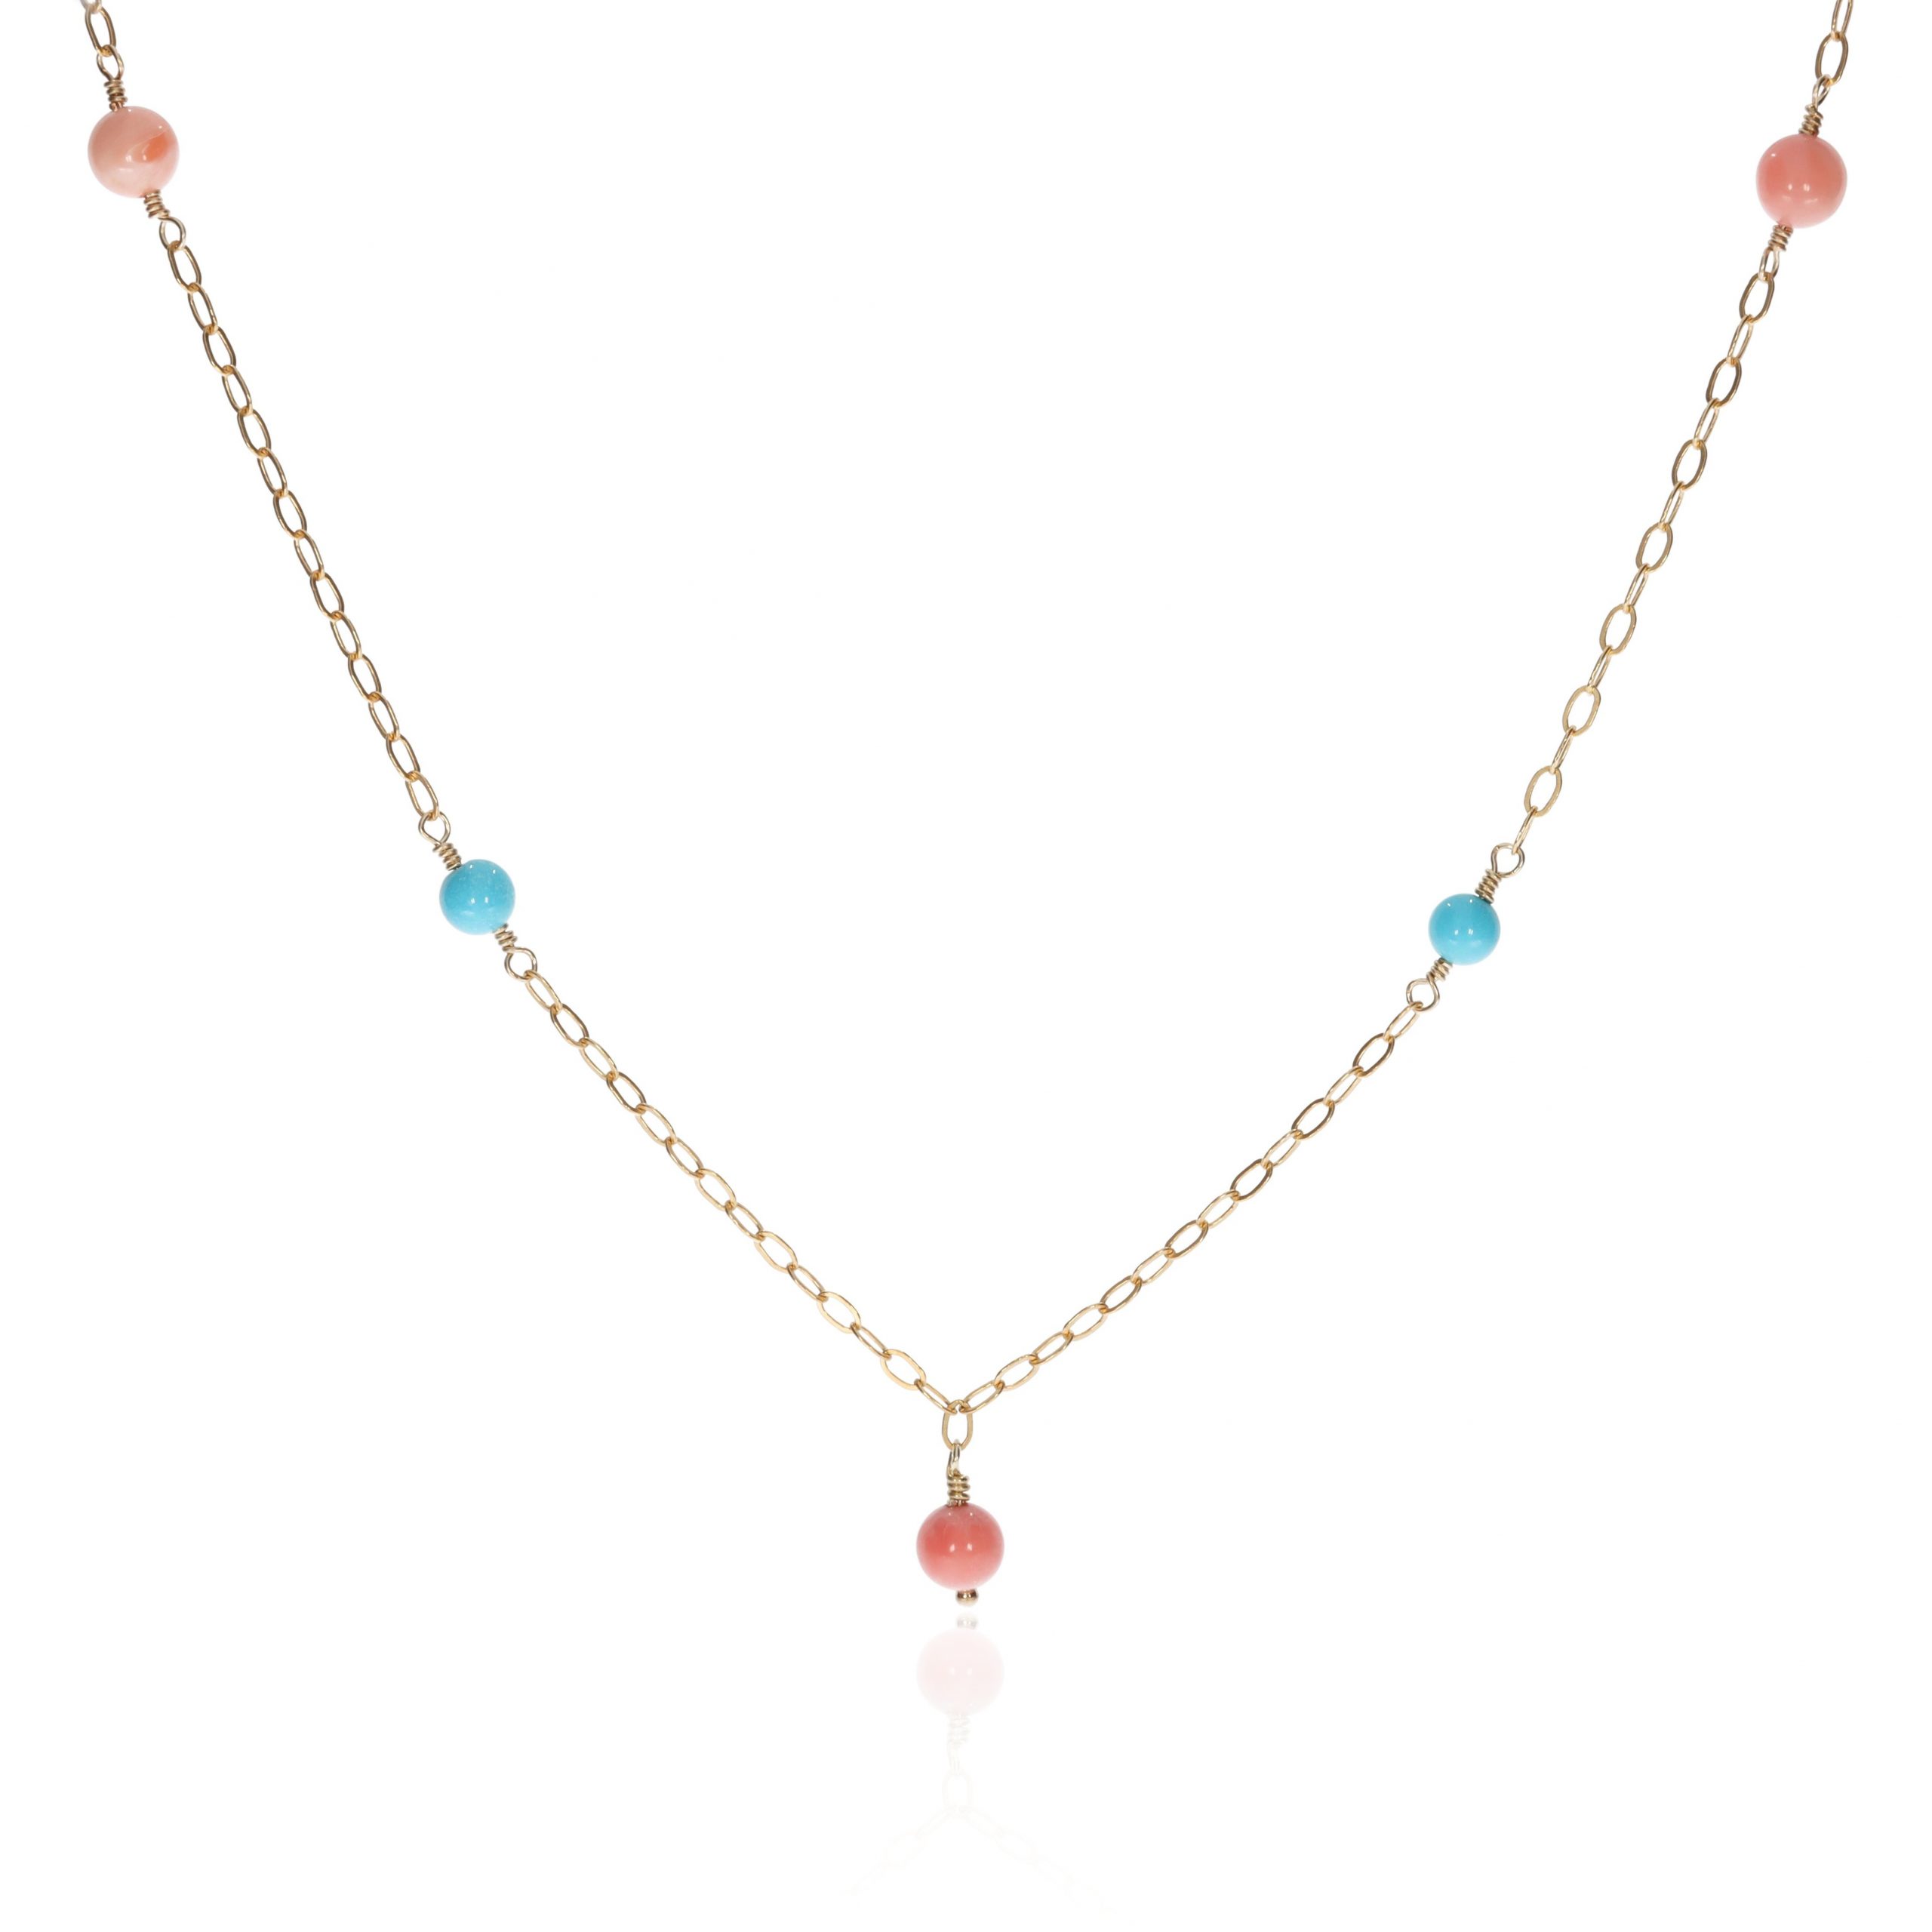 Pretty Pink and Turquoise Necklace By Heidi Kjeldsen Jewellery NL1269 front